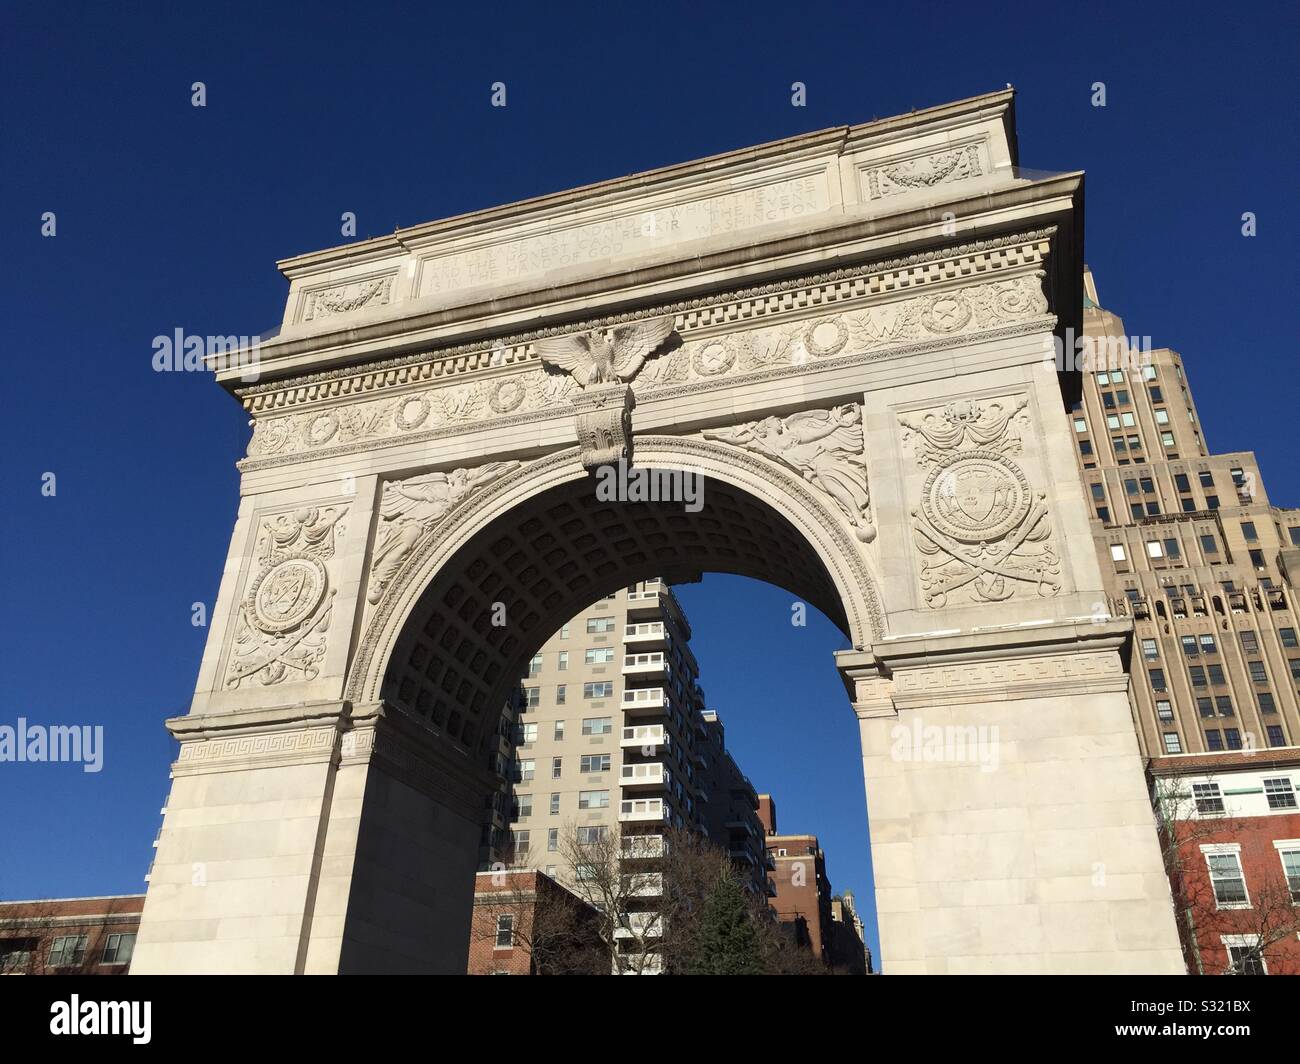 Washington Square arch is located in Washington Square, Park in Greenwich village at the terminus of fifth Ave., NYC, USA Stock Photo